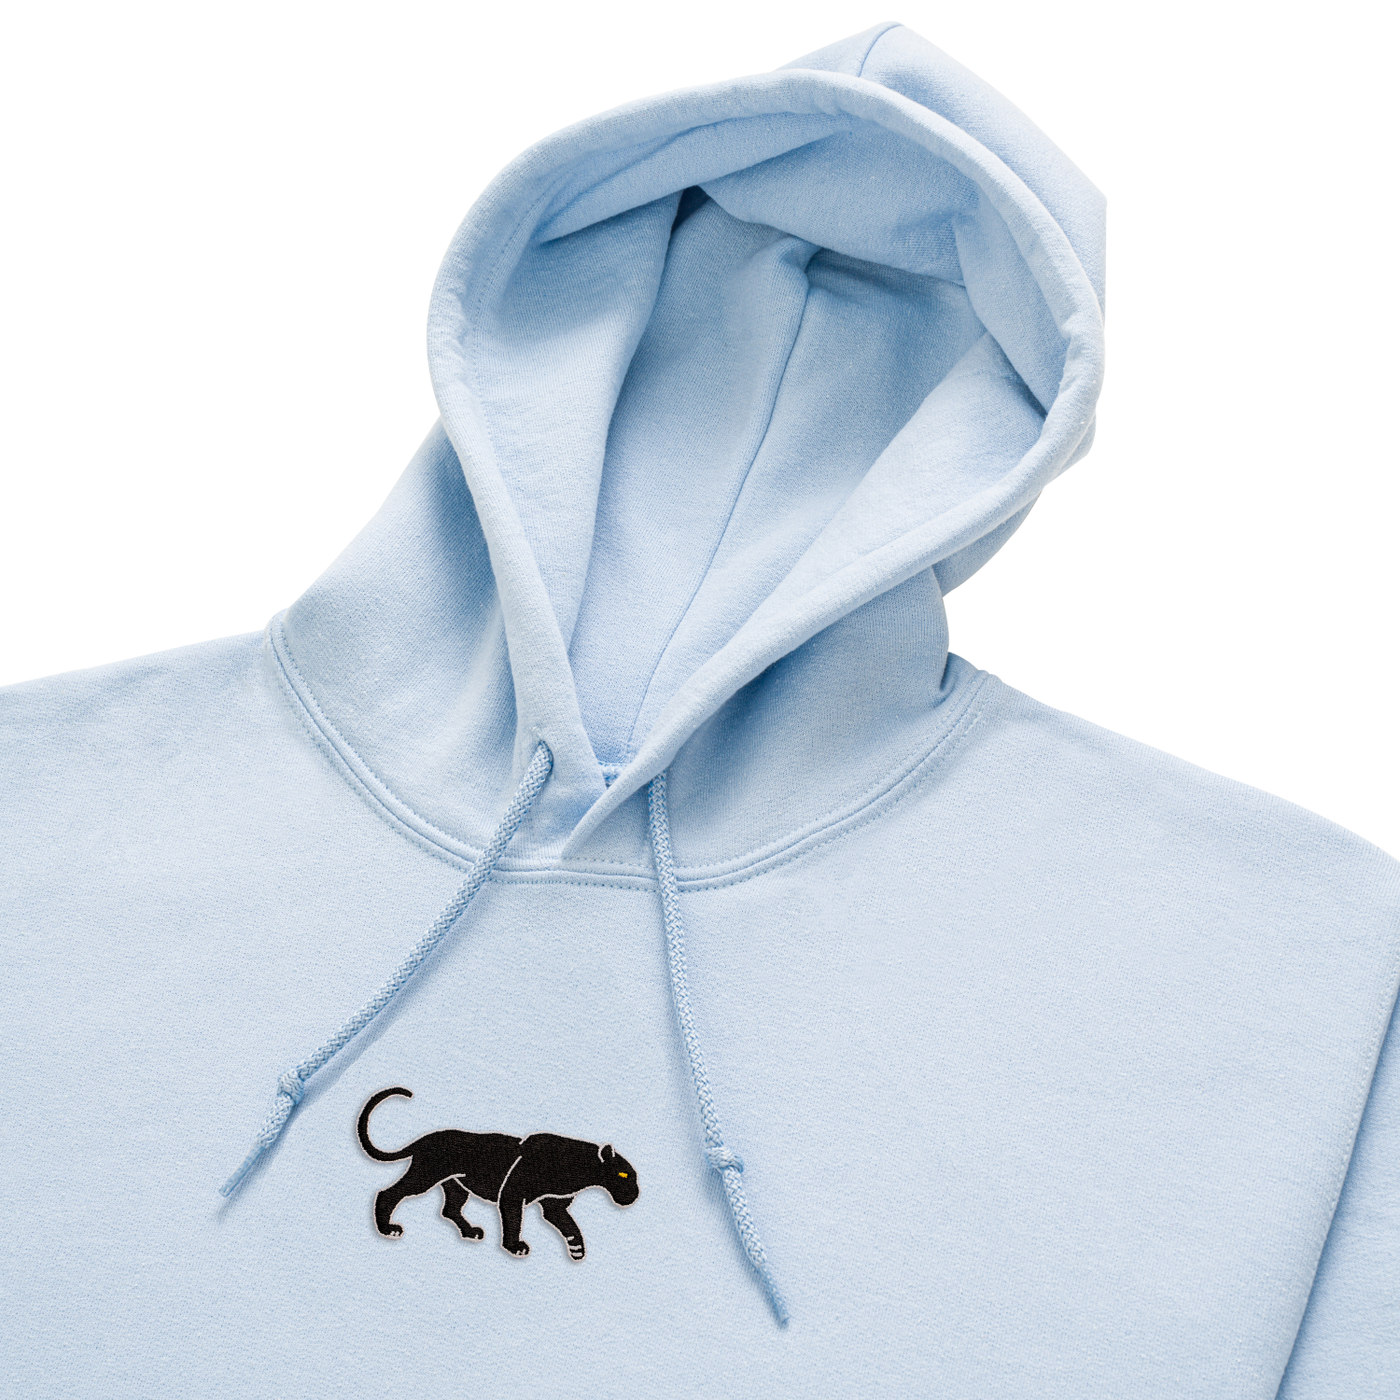 Bobby's Planet Women's Embroidered Black Jaguar Hoodie from South American Amazon Animals Collection in Light Blue Color#color_light-blue